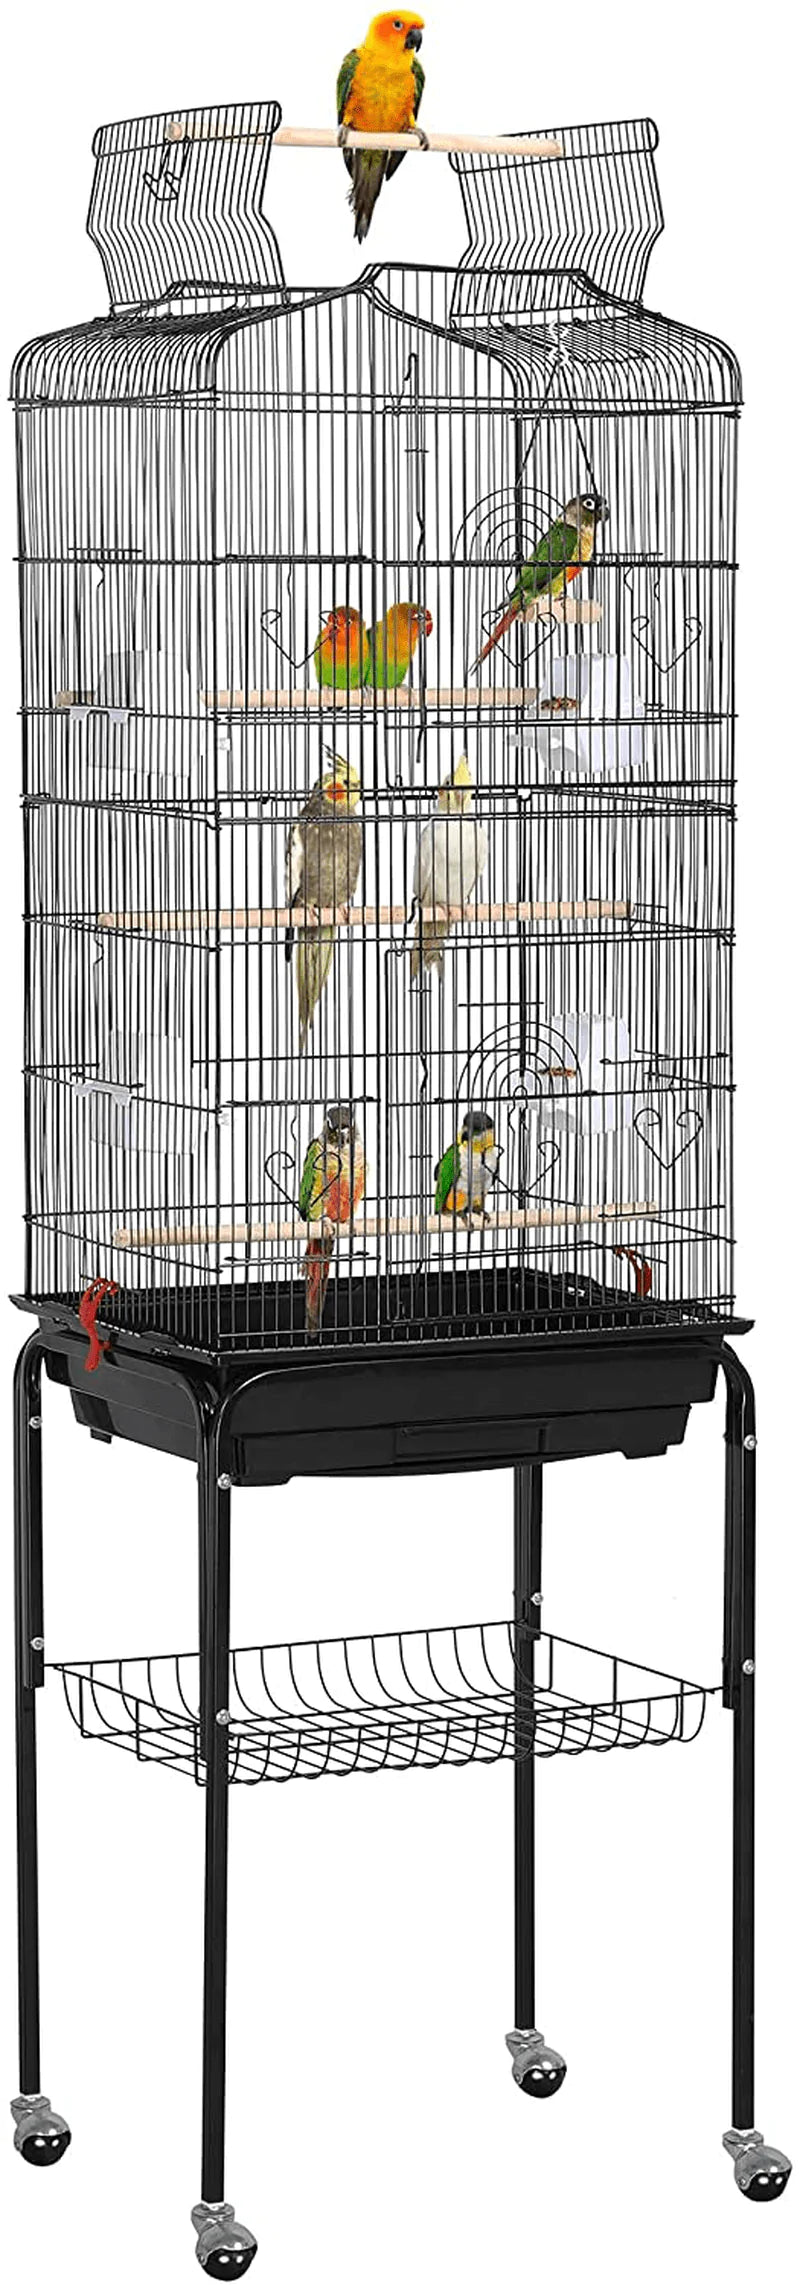 Yaheetech 64-Inch Play Open Top Medium Small Parrot Parakeet Bird Cage for Lovebirds Finches Canaries Parakeets Cockatiels Budgie Parrotlet Conures Bird Cage with Detachable Rolling Stand Animals & Pet Supplies > Pet Supplies > Bird Supplies > Bird Cage Accessories Yaheetech Black  